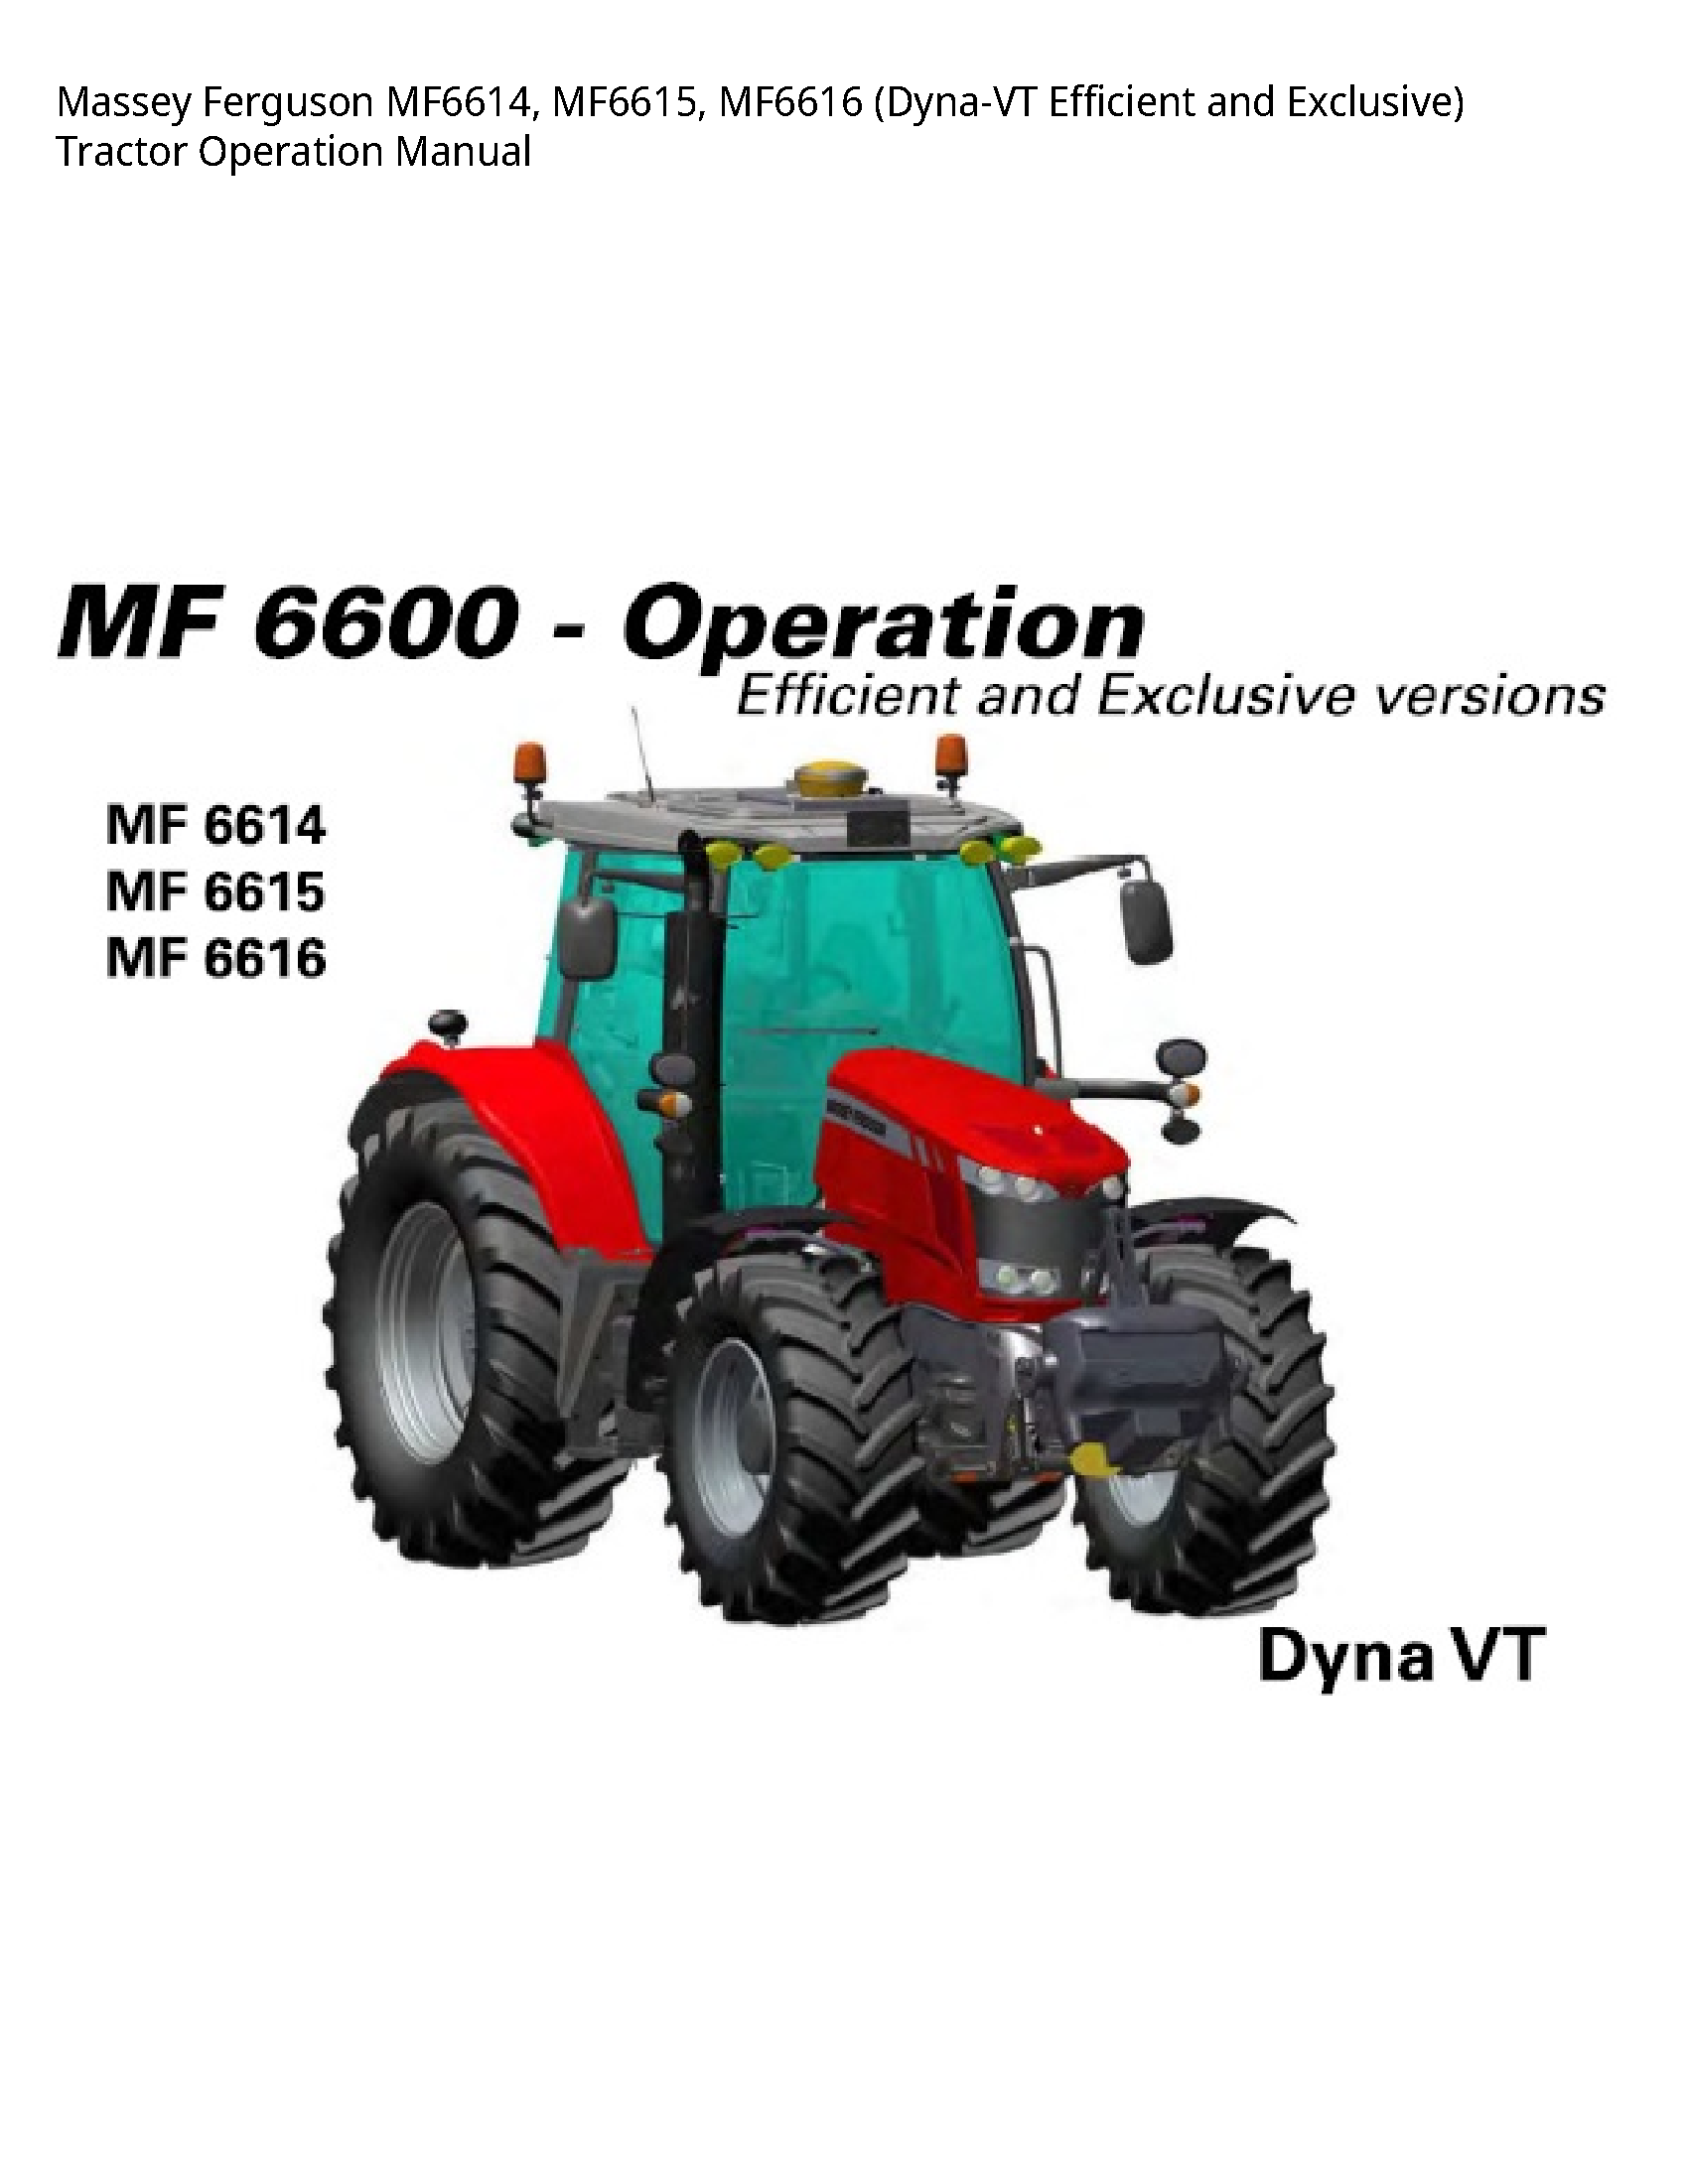 Massey Ferguson MF6614 (Dyna-VT Efficient  Exclusive) Tractor Operation manual